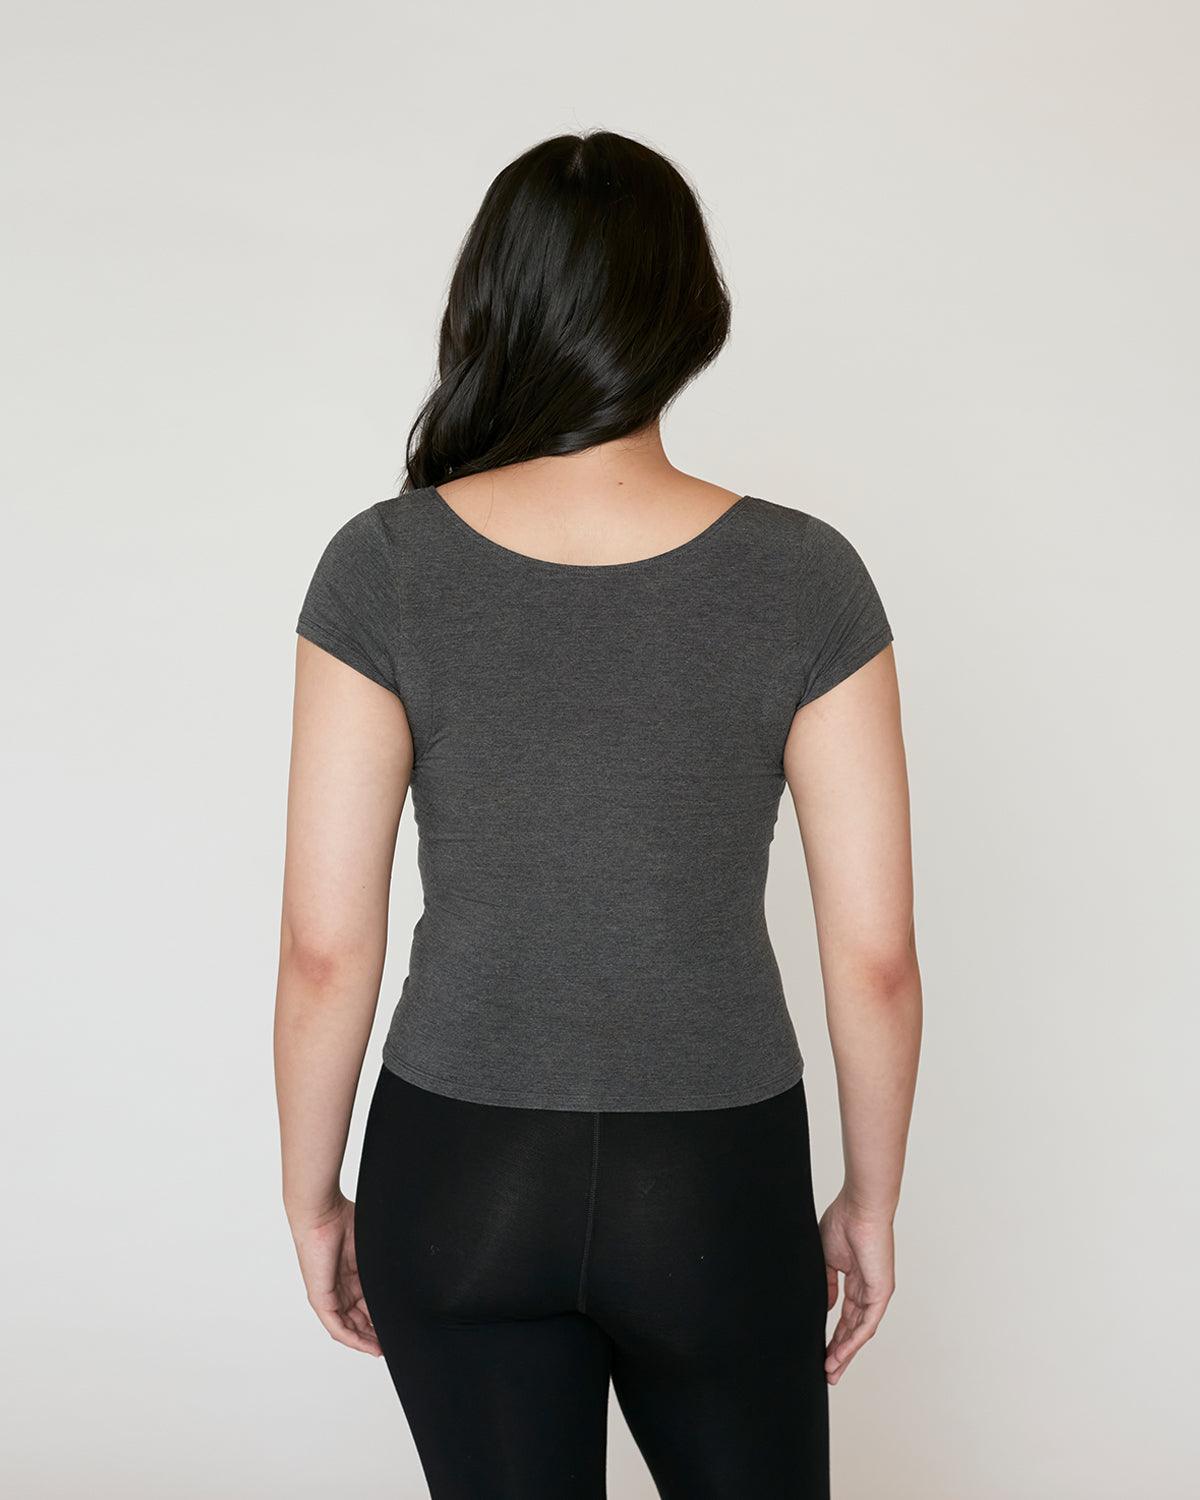 "#color_CHARCOAL| Emi is 5'7.5", wearing a size S